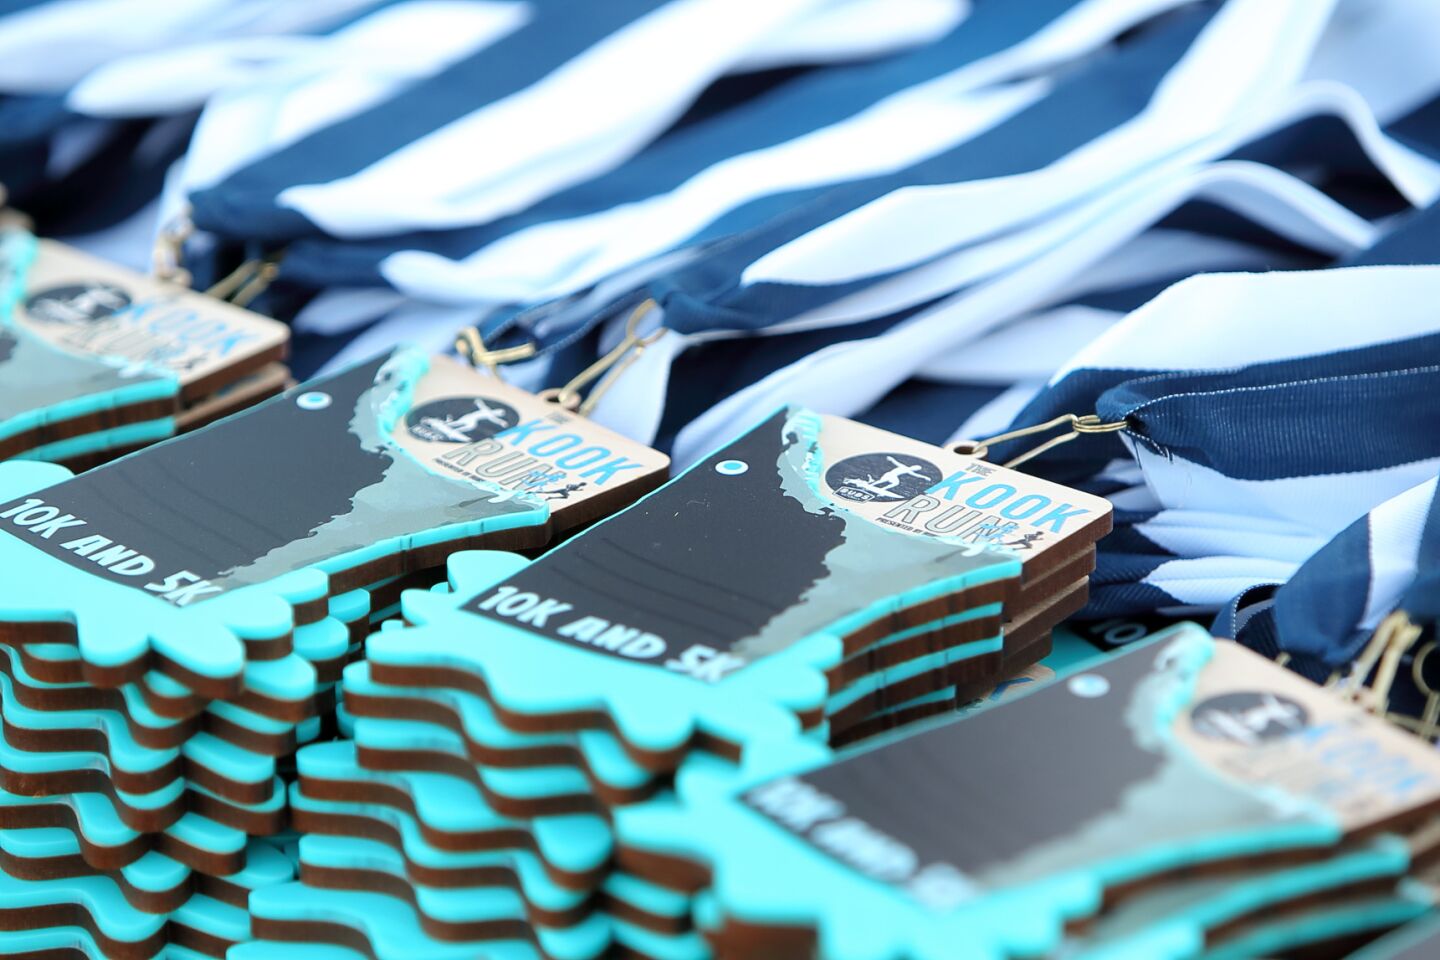 Medals for those who finish the Cardiff Kook Run